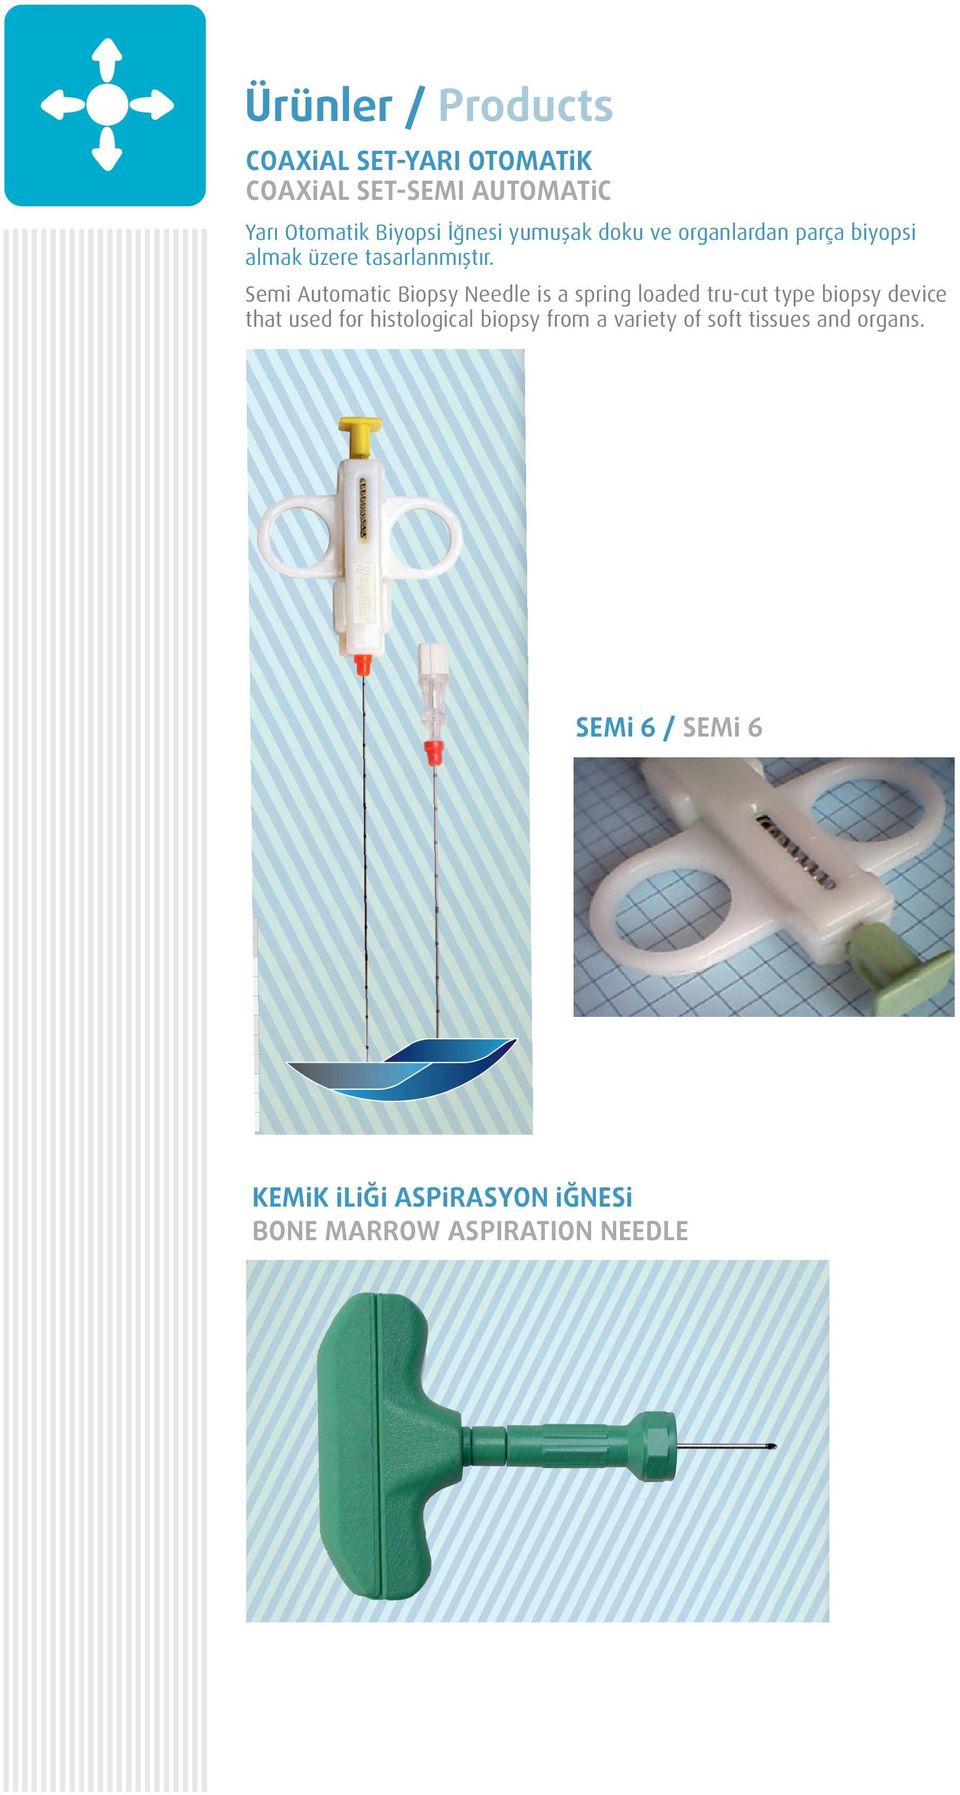 Semi Automatic Biopsy Needle is a spring loaded tru-cut type biopsy device that used for